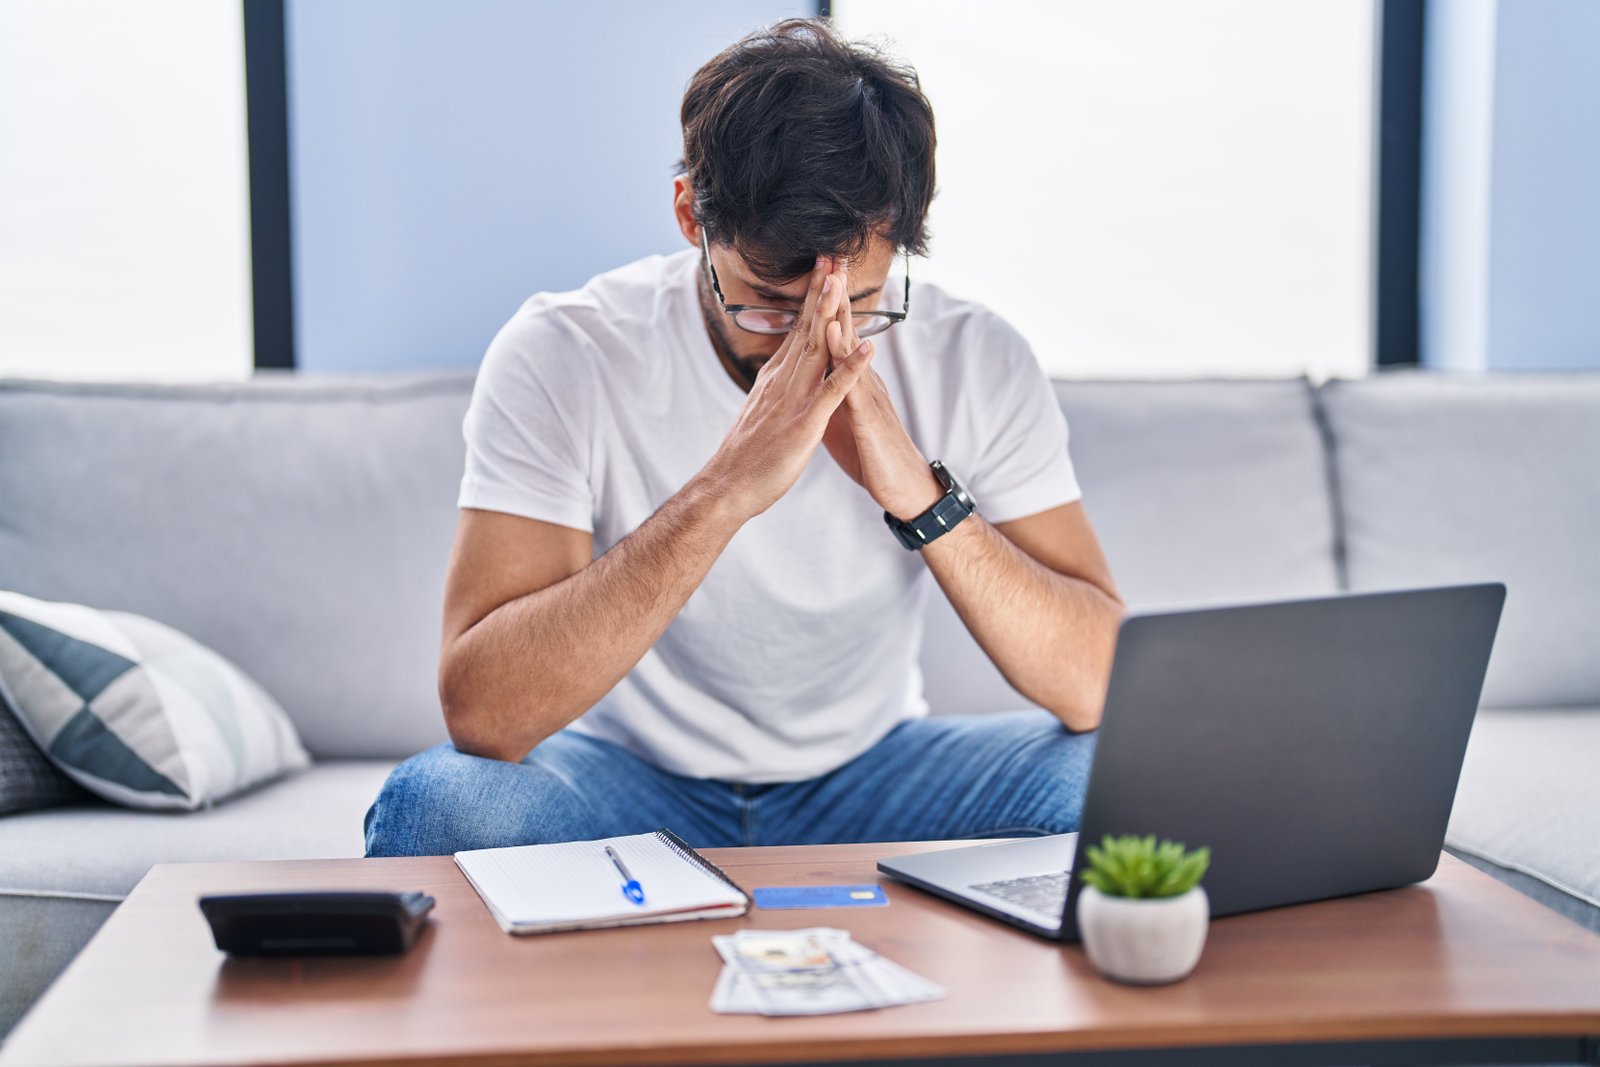 8 Workplace Stress Management Tips For Remote Employees